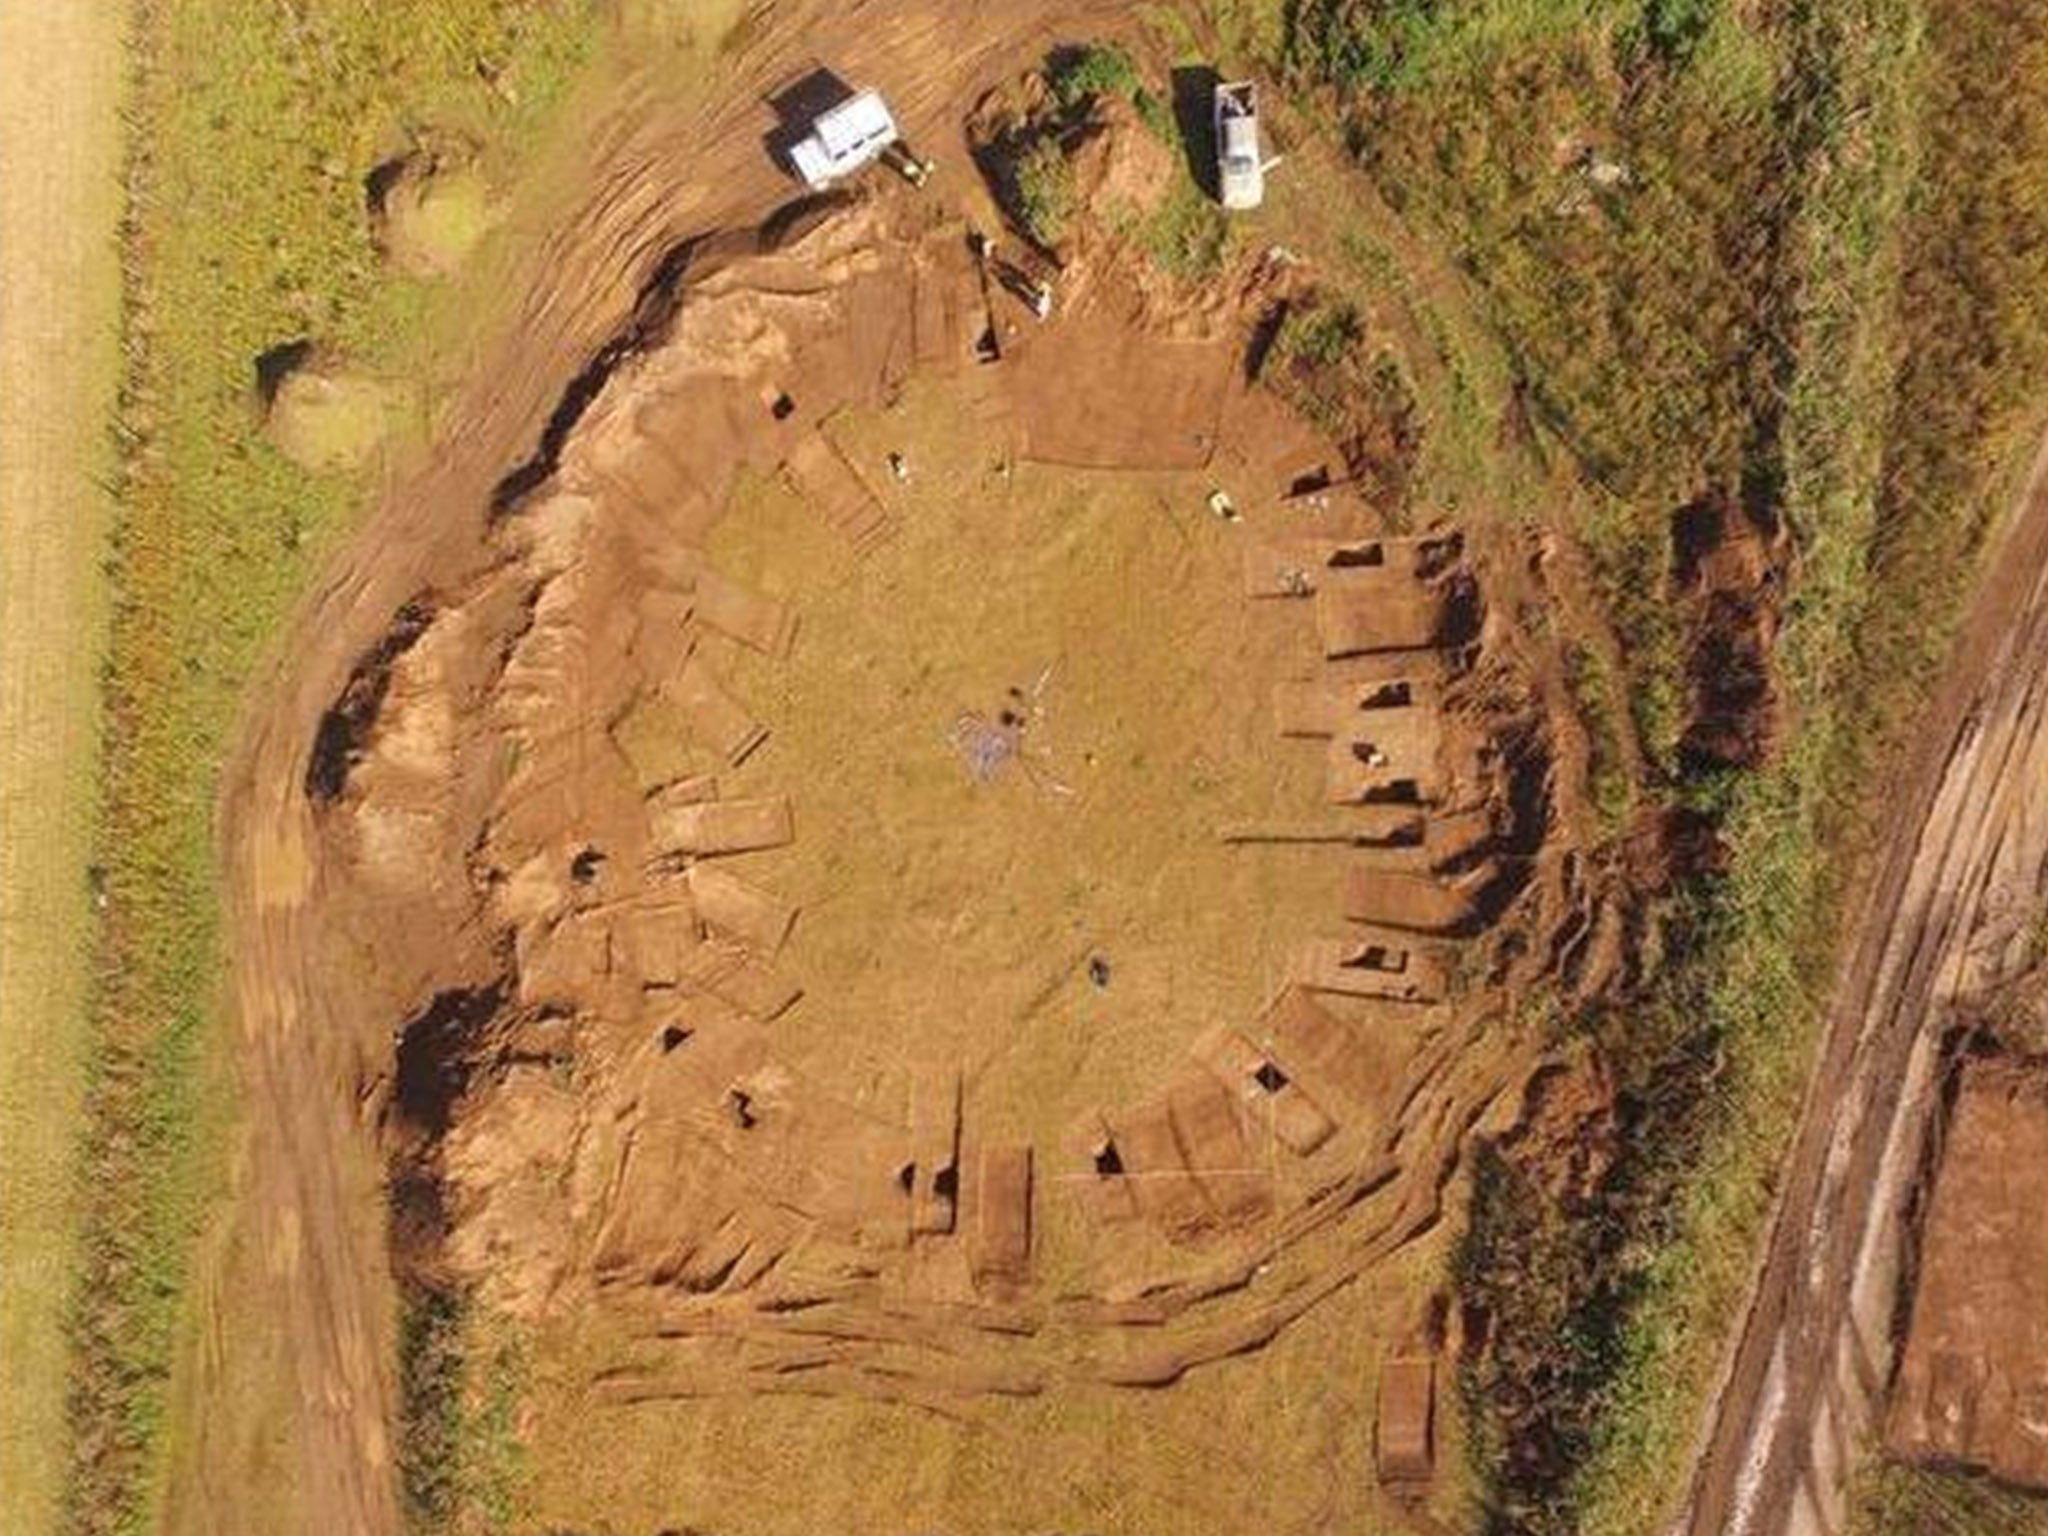 4 000 year-old woodhenge that could have been ancient 